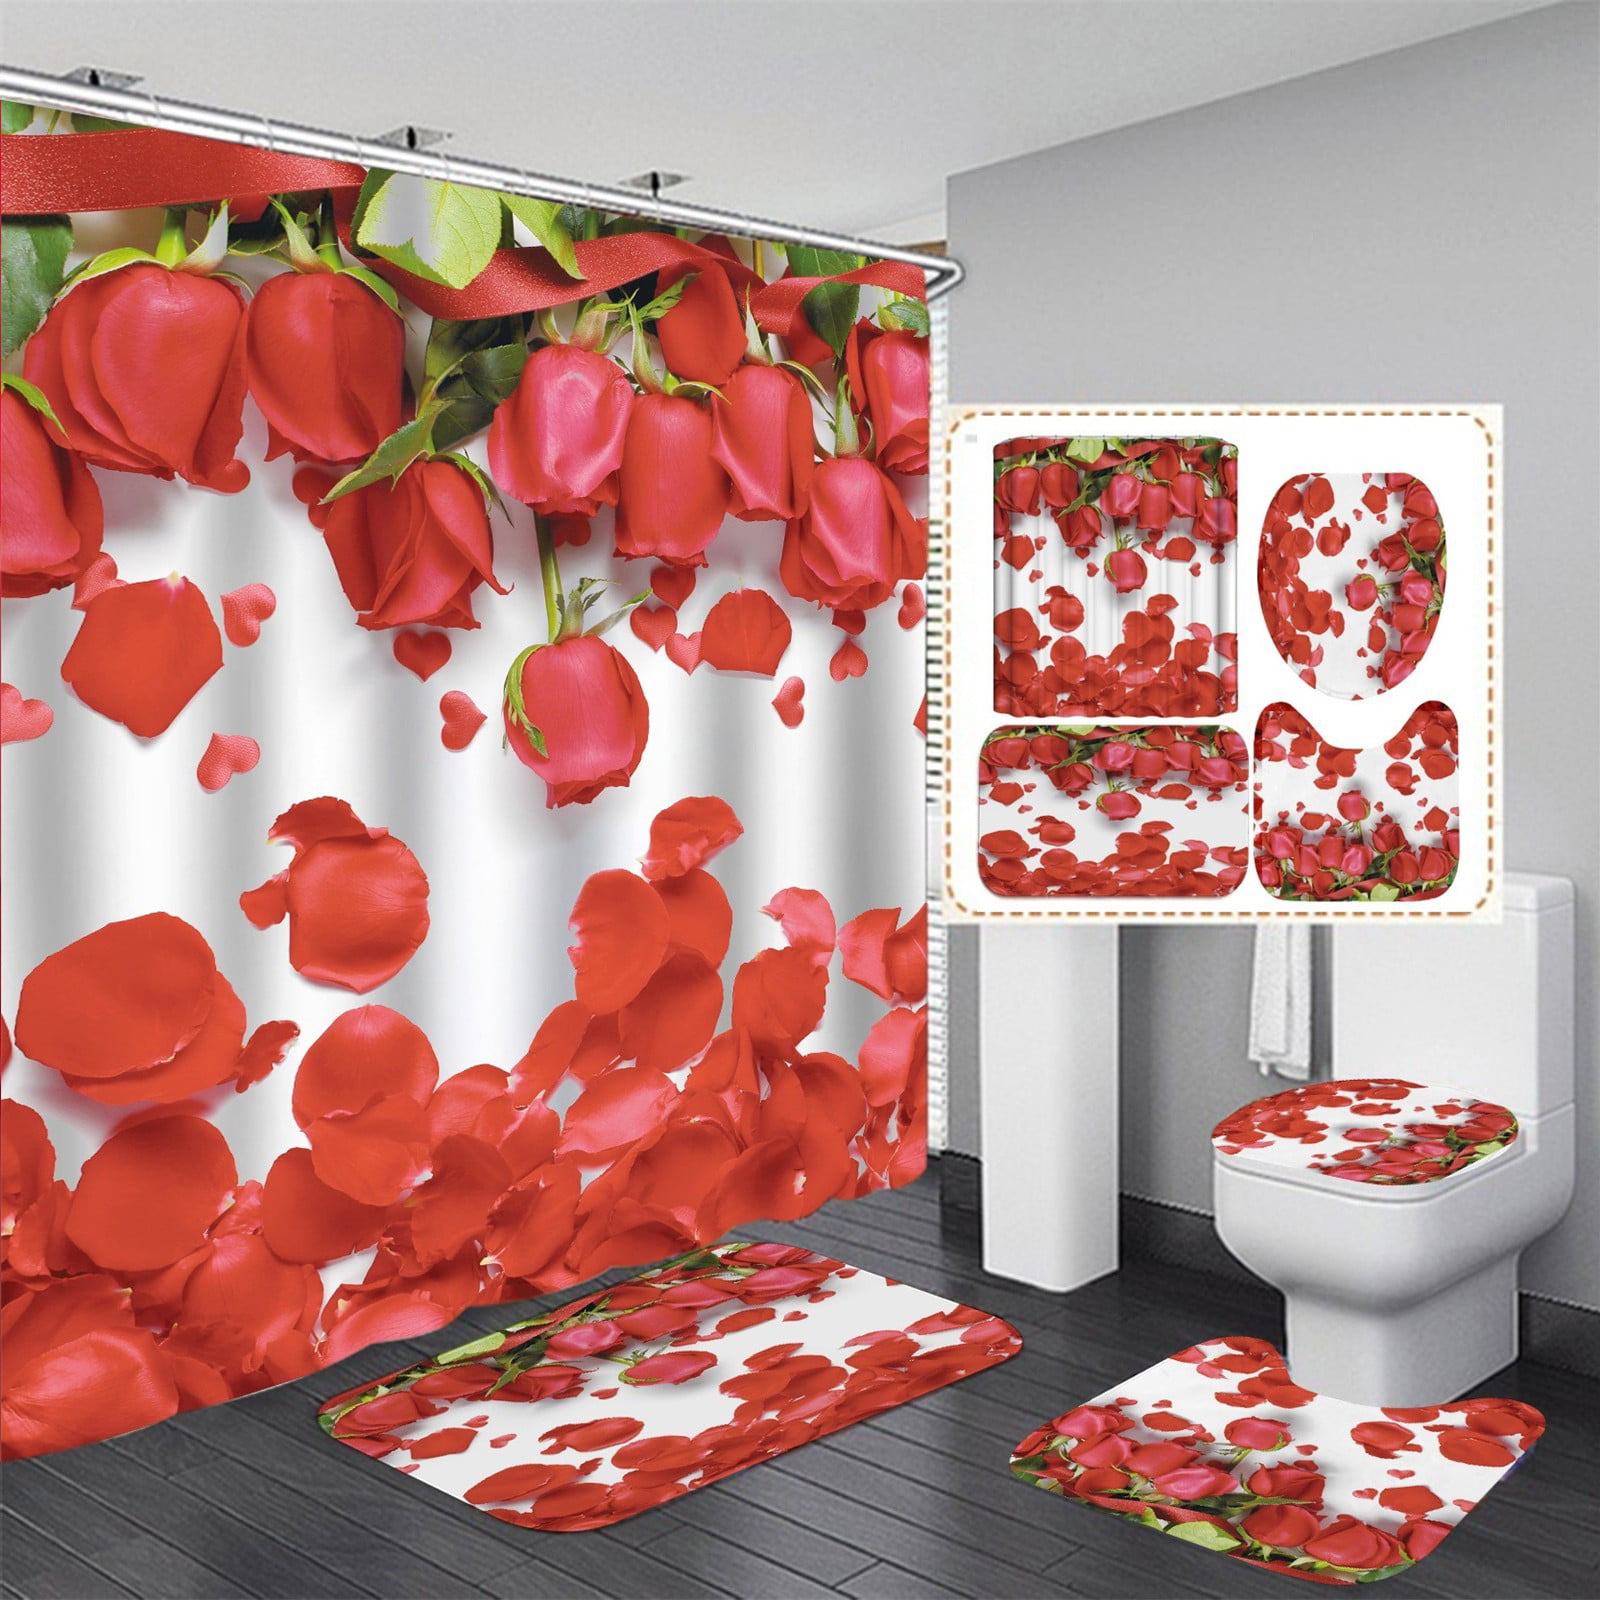 Toilet Lid Cover and Bath Mat Details about   Sunflowers Shower Curtain Sets with Non-Slip Rugs 